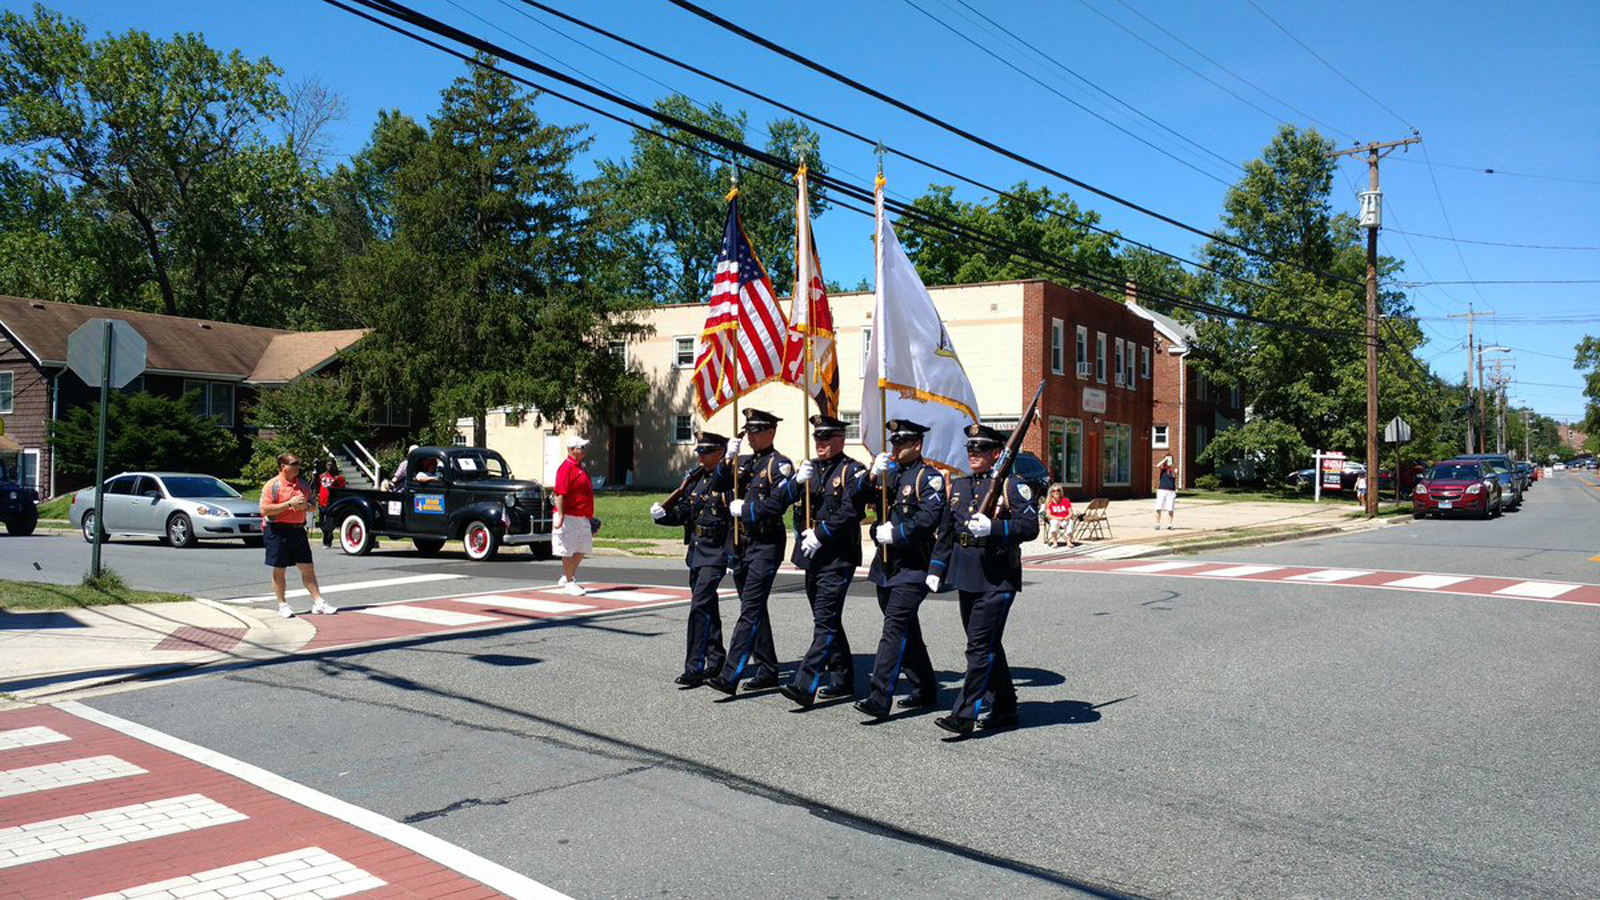 The Prince George's County Sheriff's office shared photos on Twitter from the Fourth of July parade in Laurel, Md., on Saturday. (Twitter/Prince George's County Sheriff's Office)